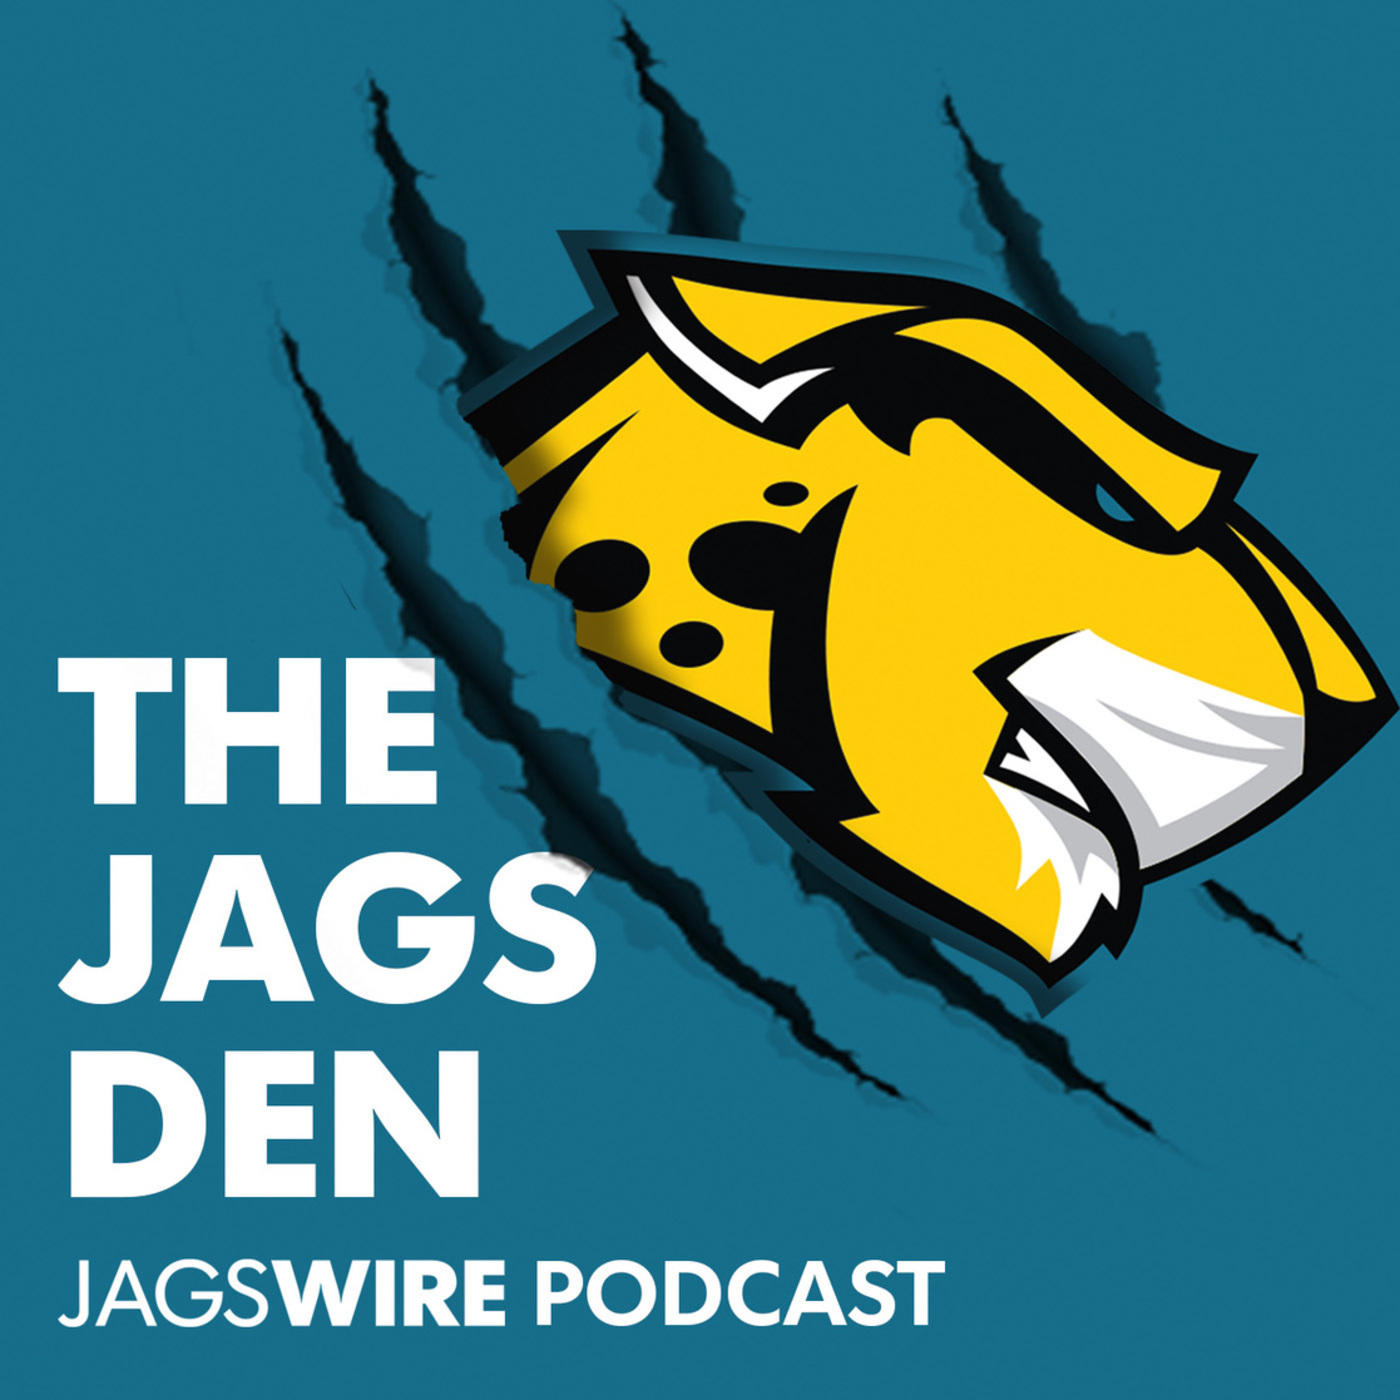 Jags Den Podcast Ep. 39: Discussions on Telvin Smith's decision to sit 2019 out and a look at the Jags' offensive personnel 